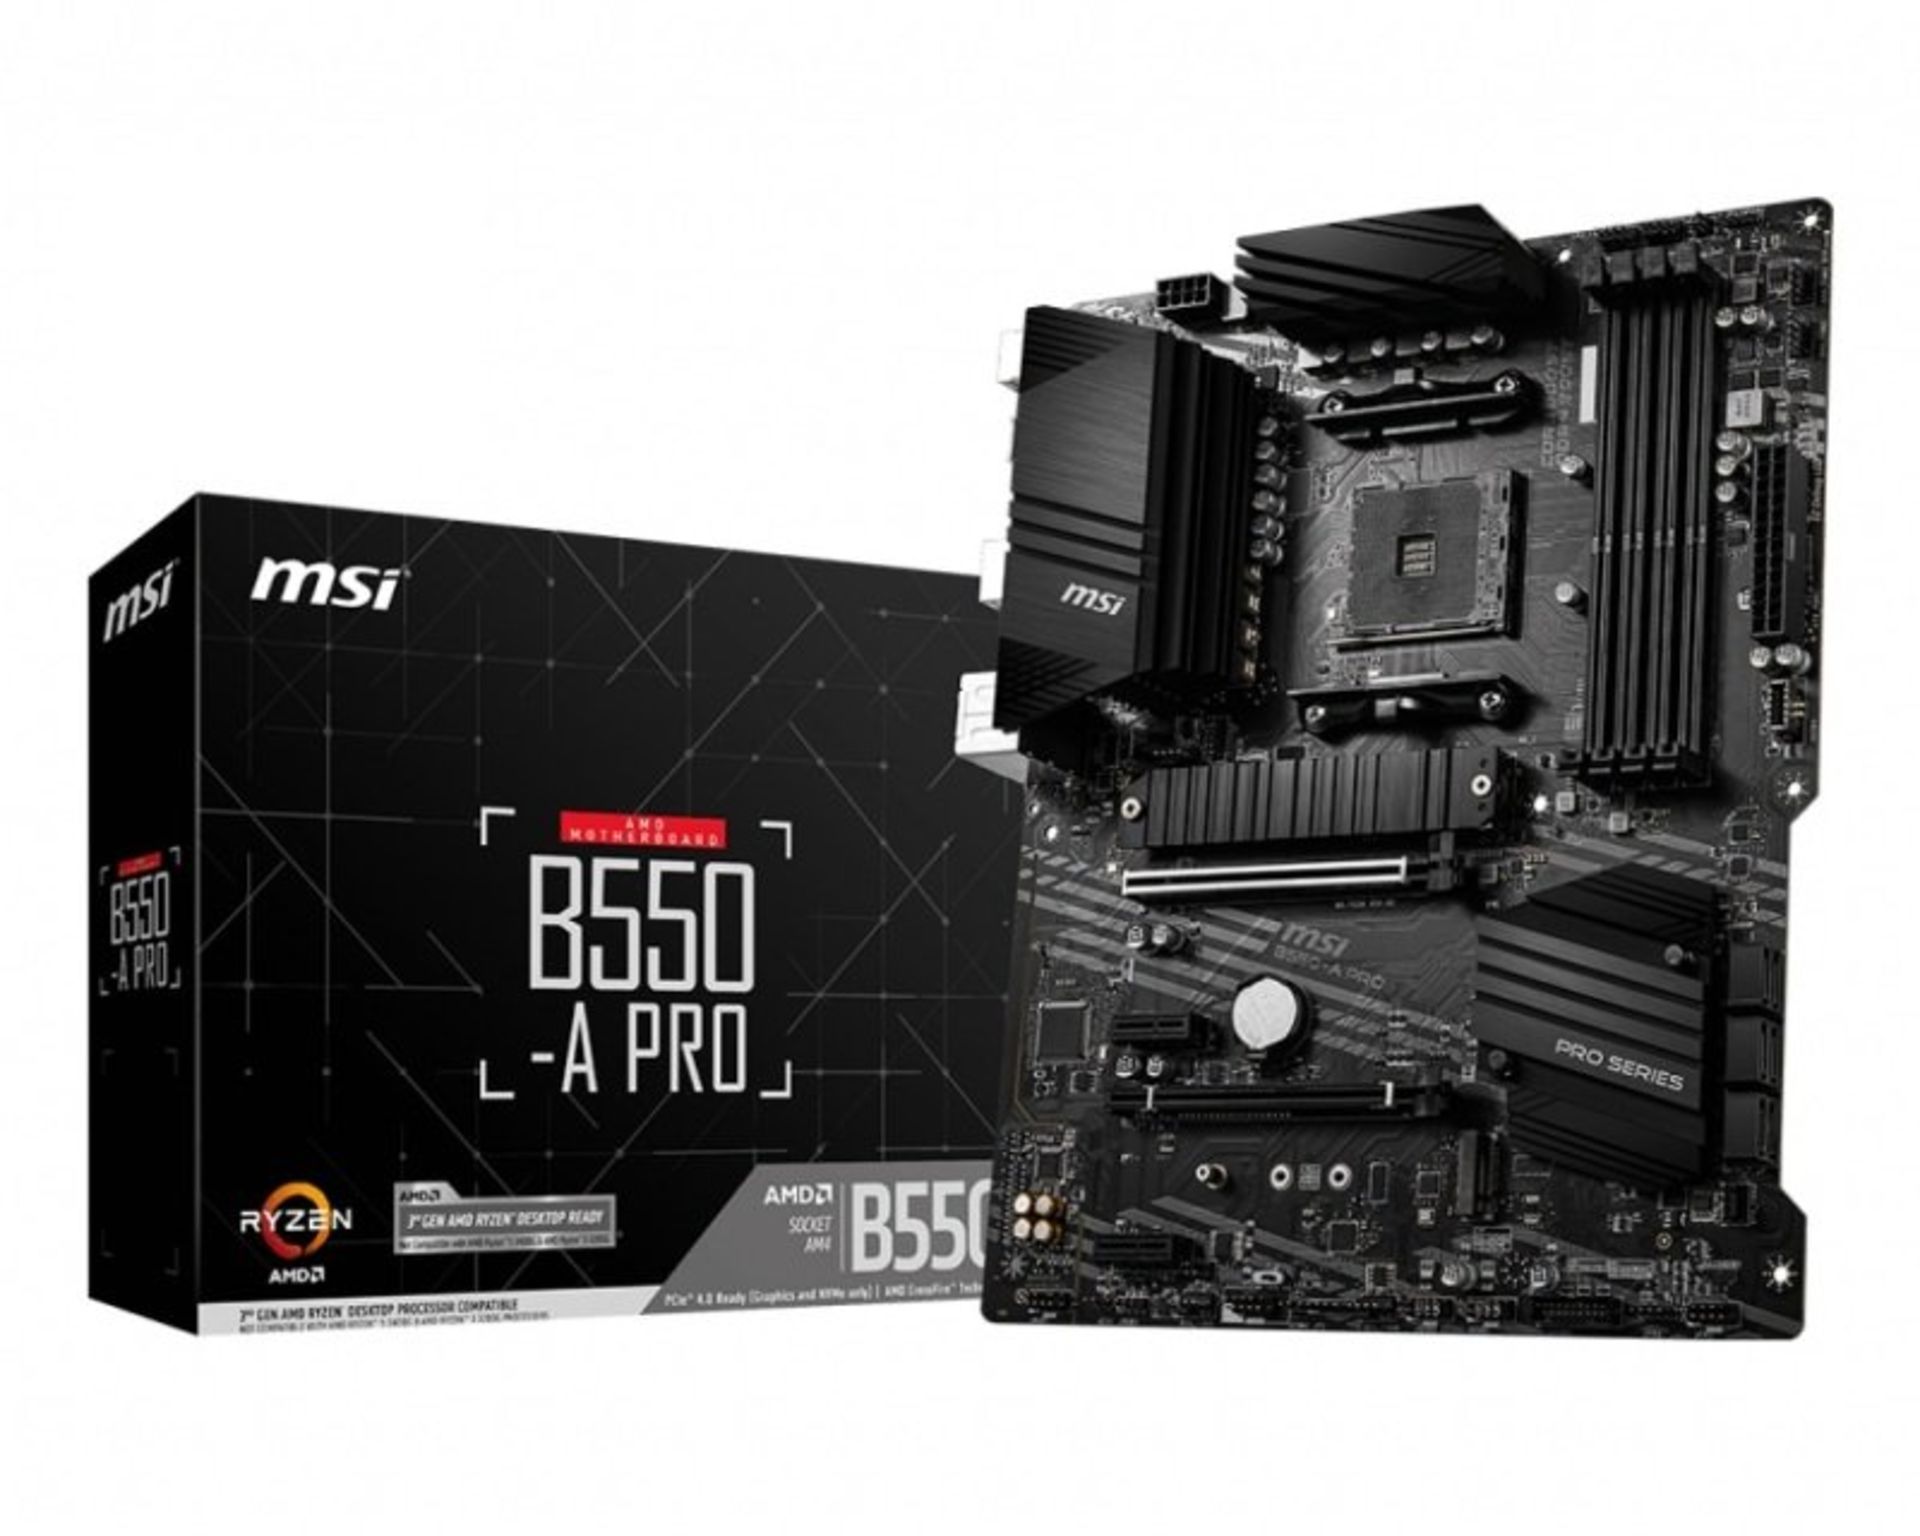 MSI B550-A PRO DDR4 ATX Motherboard. - BW. Introducing the all new B550-A PRO Motherboard from